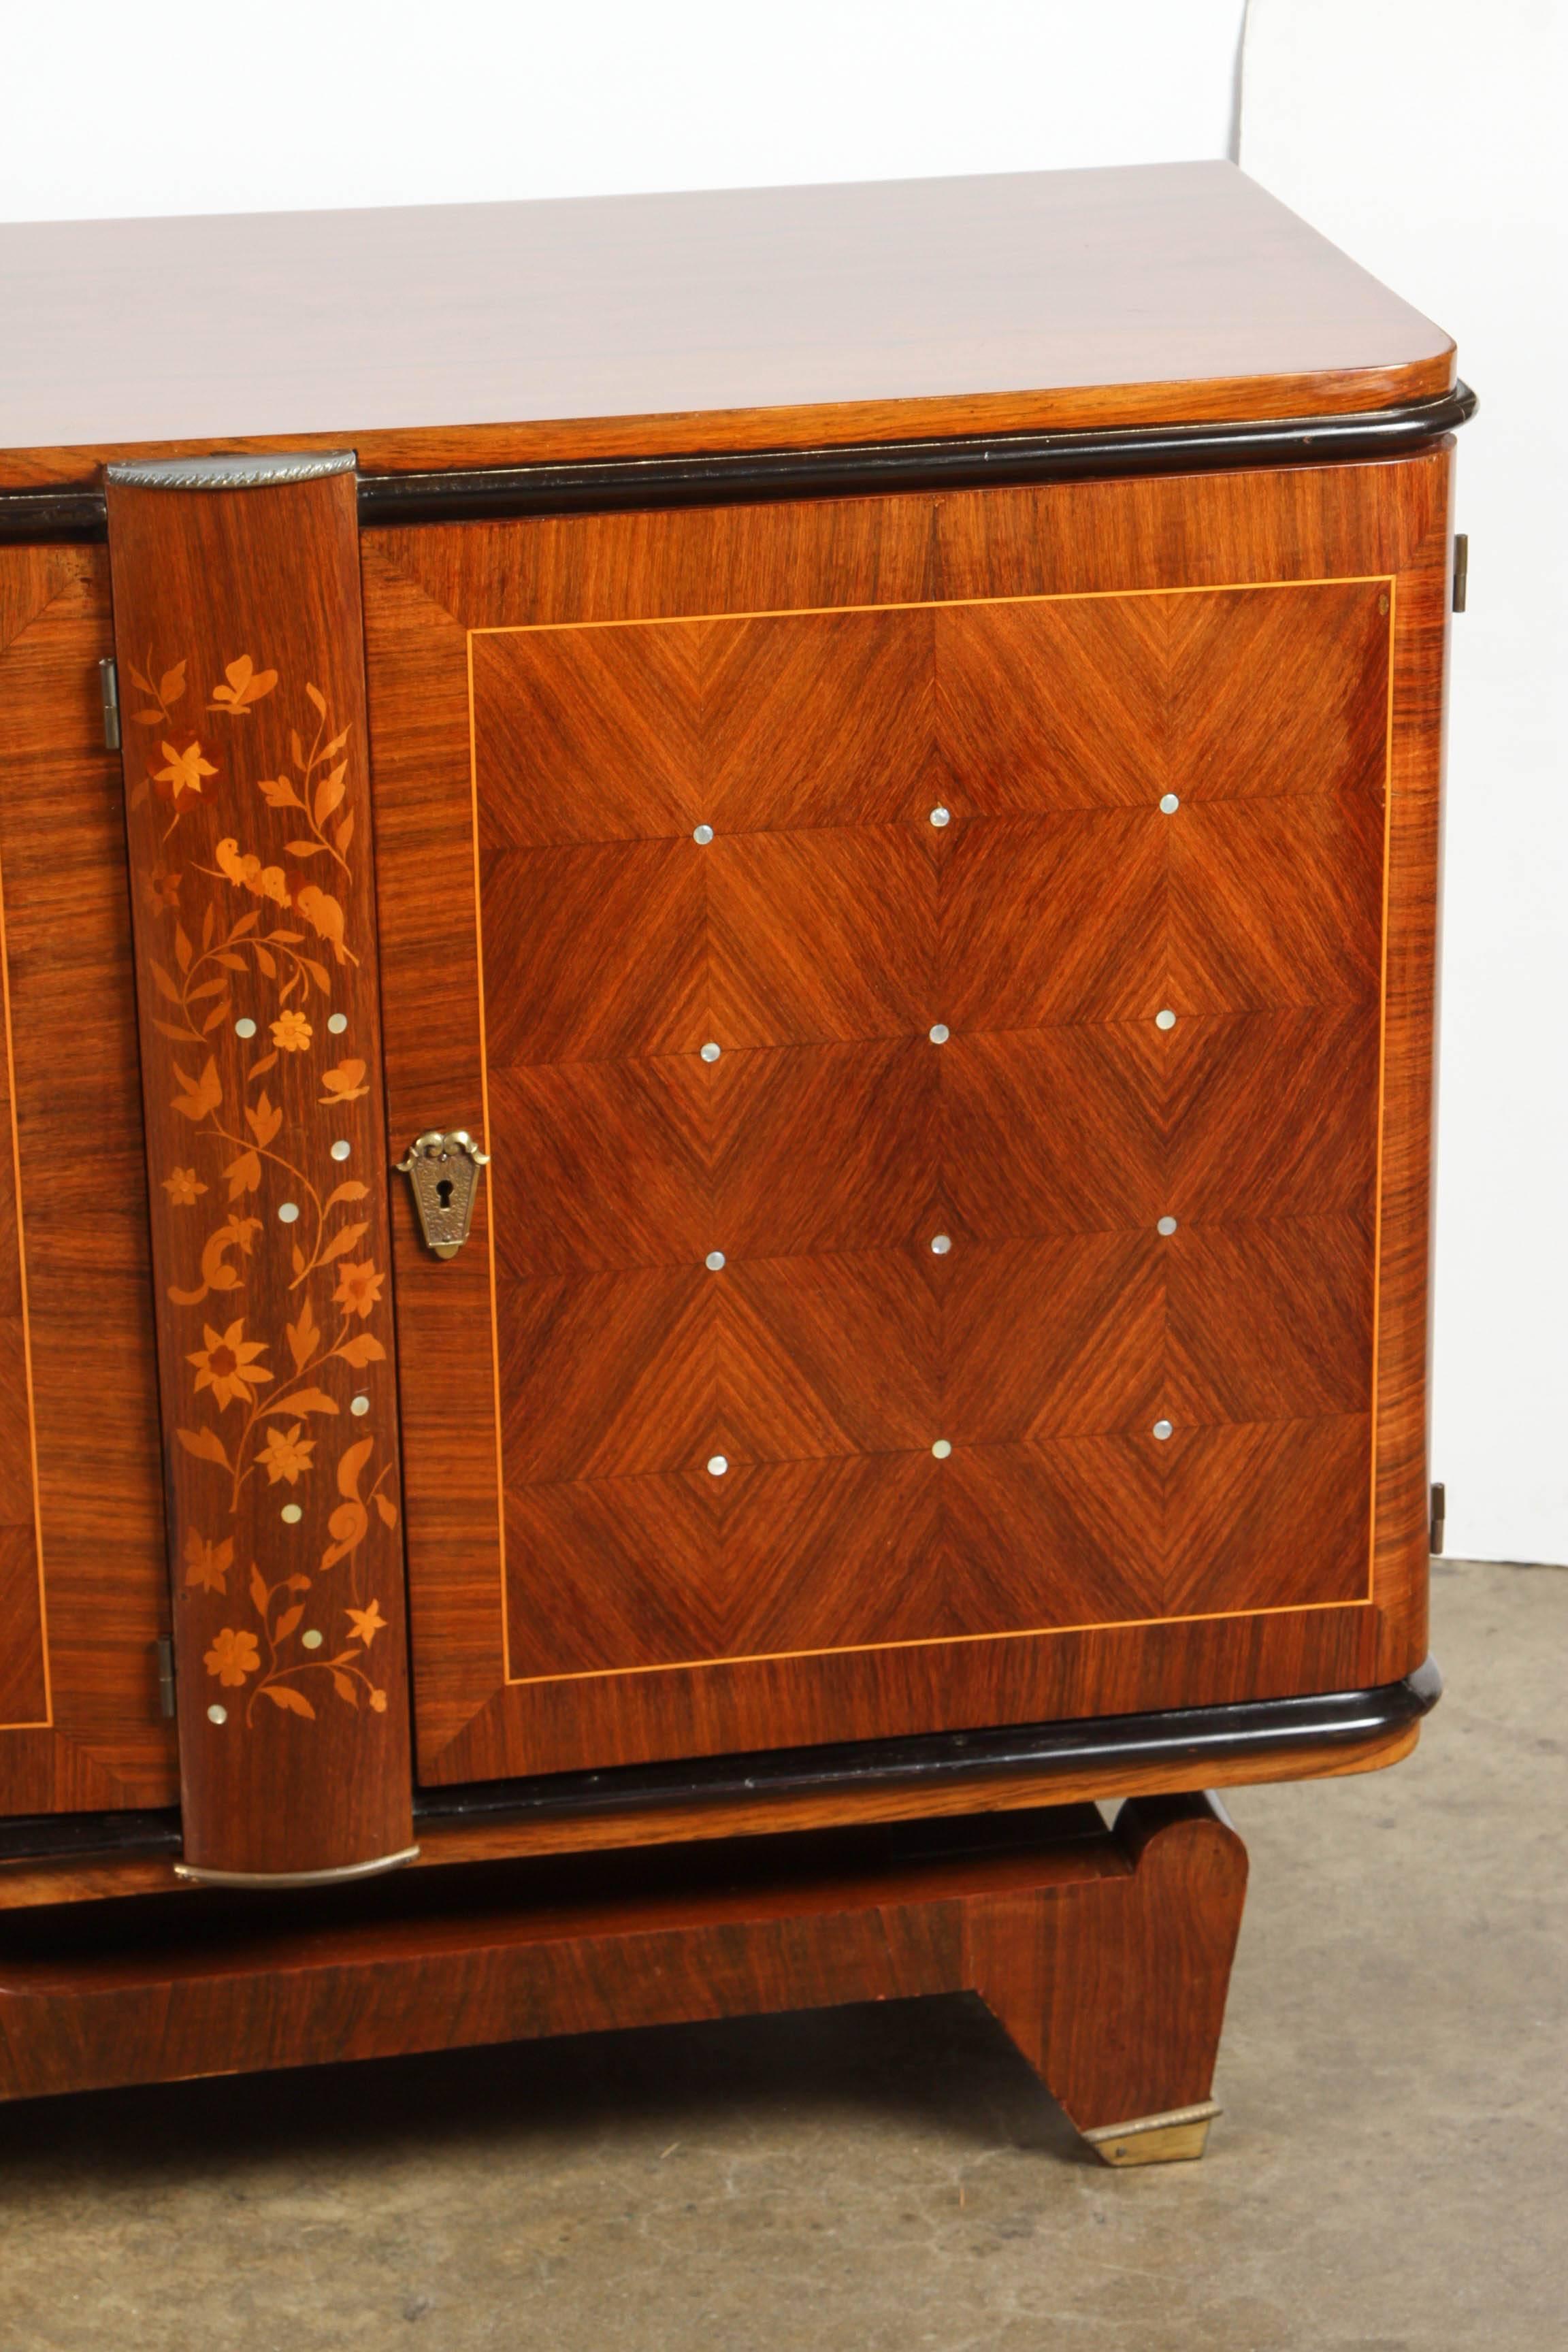 In the style of Andre Leleu the sideboard is done in a marquetry and inlaid over all.